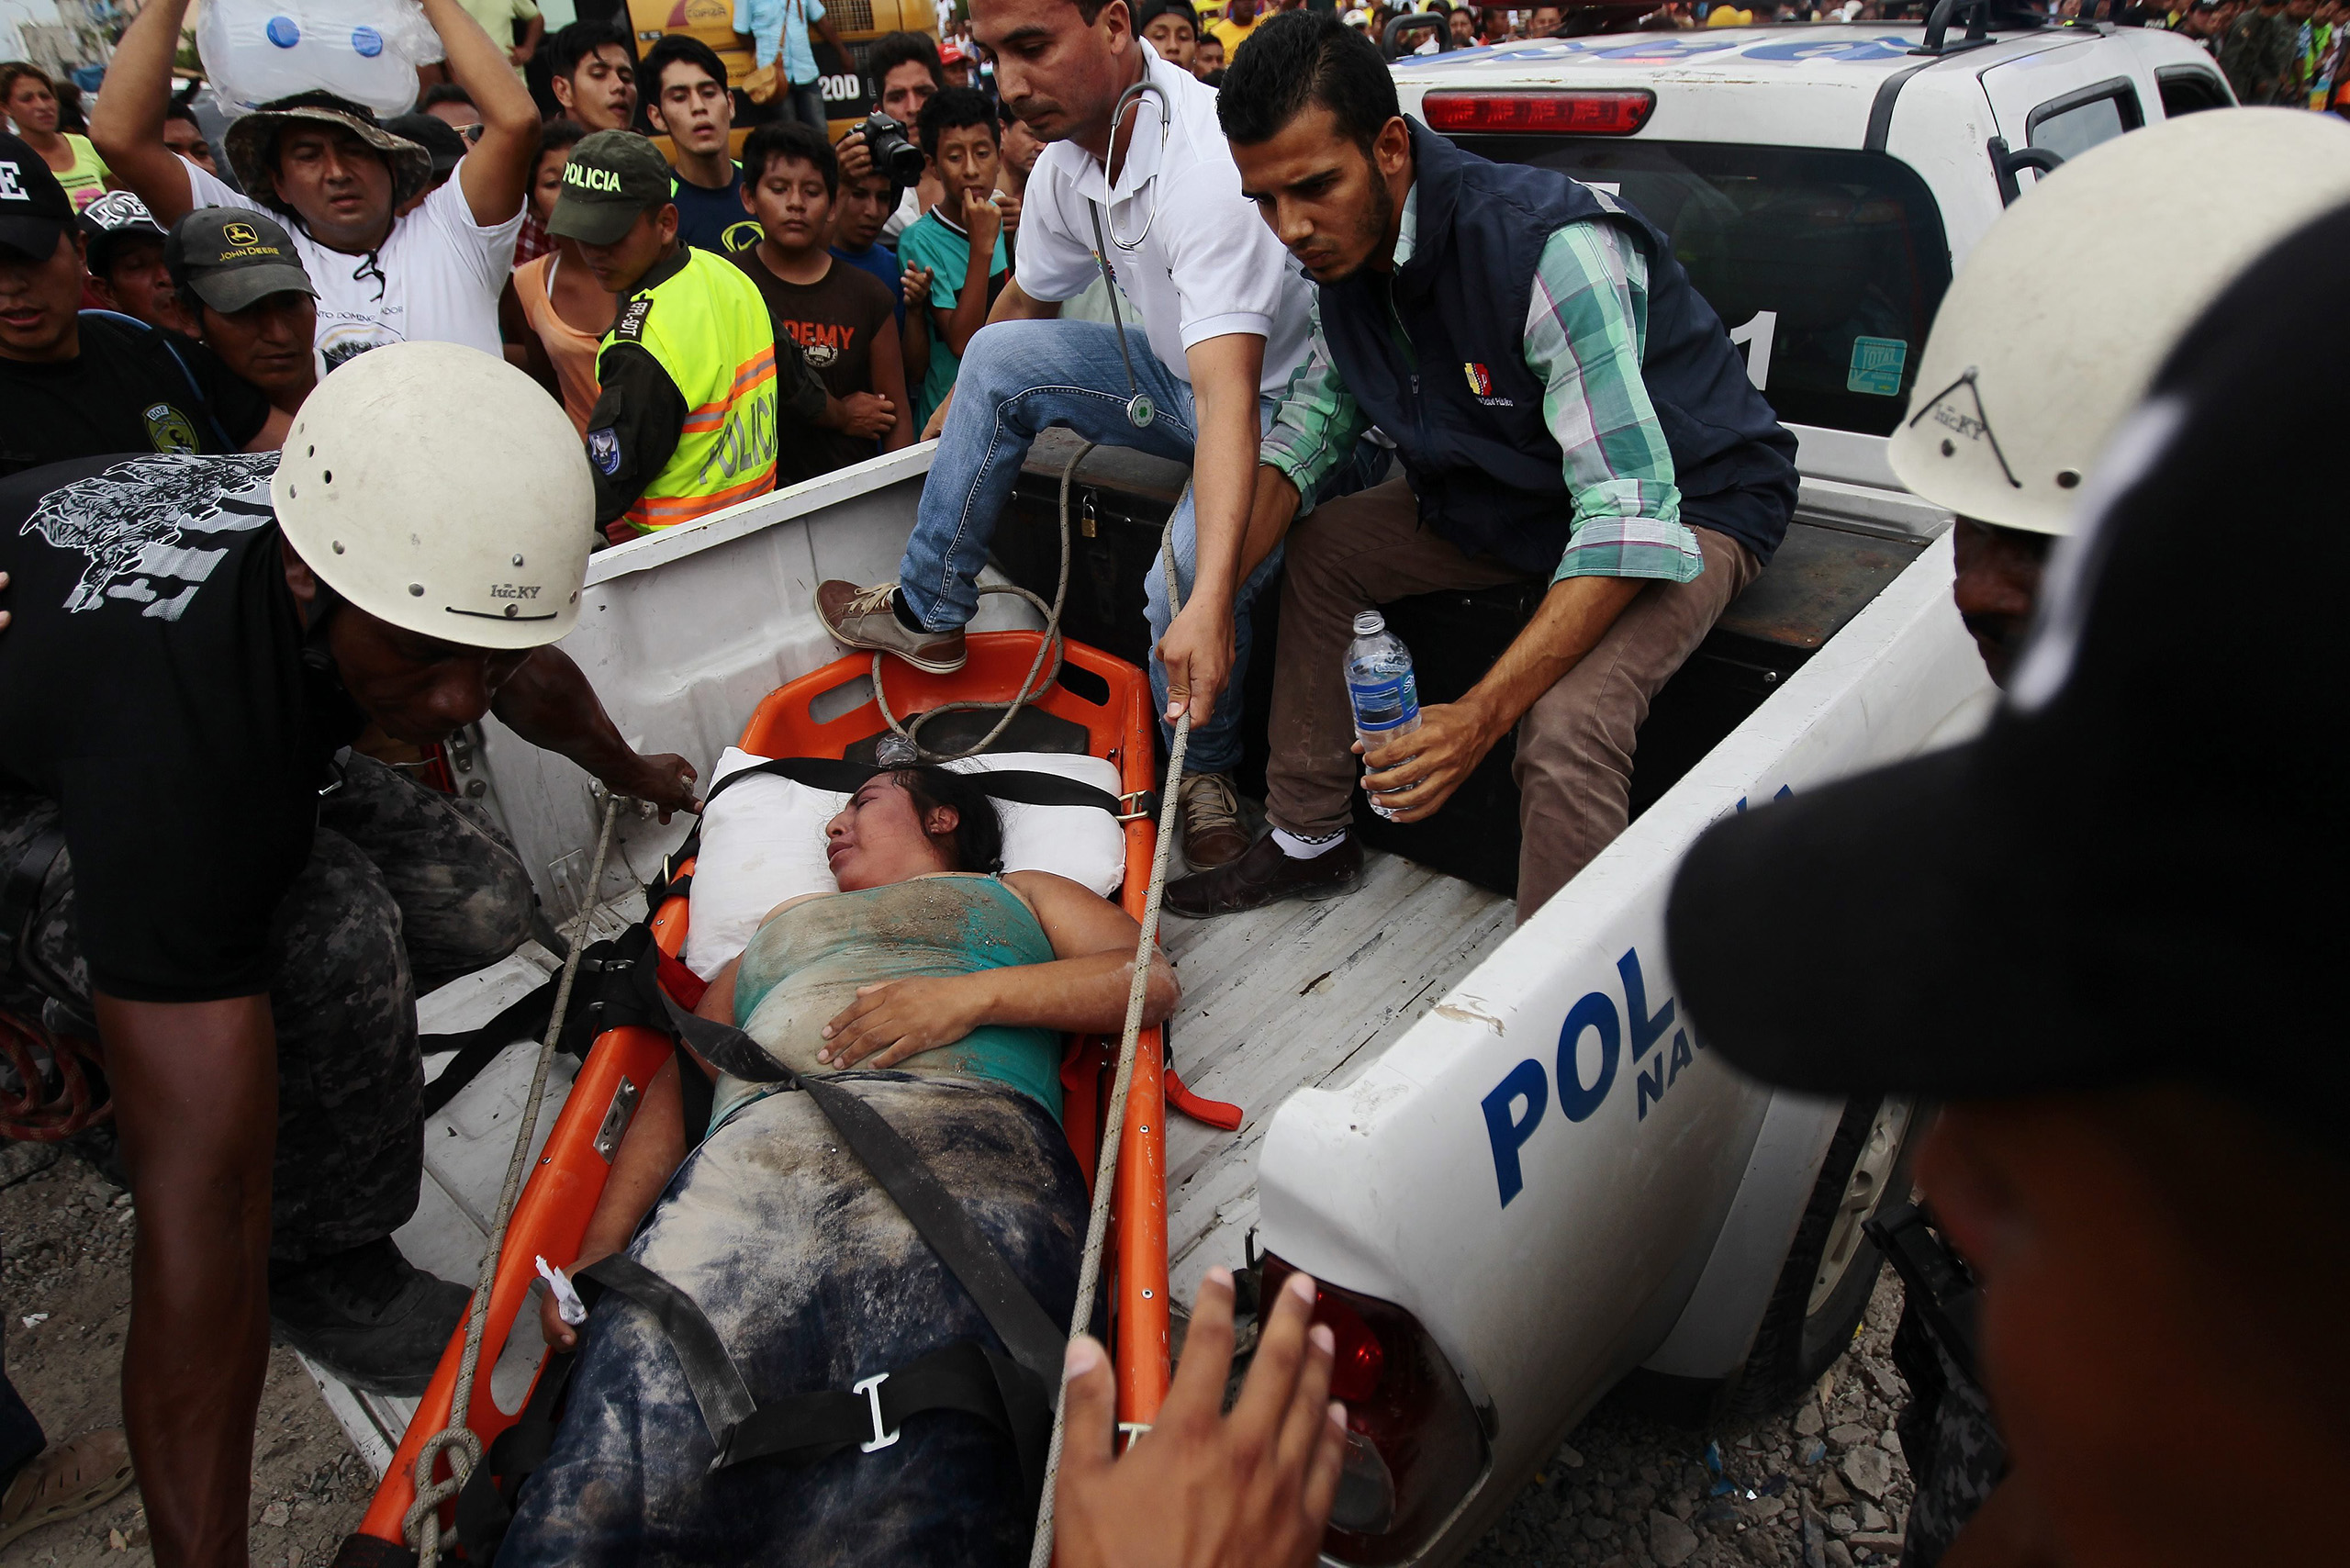 An injured woman is carried on a stretcher into a vehicle by a team of emergency services in Pedernales, Ecuador, April 17, 2016. A 7.8-magnitude earthquake hit the northern Ecuadoran coastal region the day earlier, killing at least 400 people as rescue operations continue. (Jose Jacome—EPA)